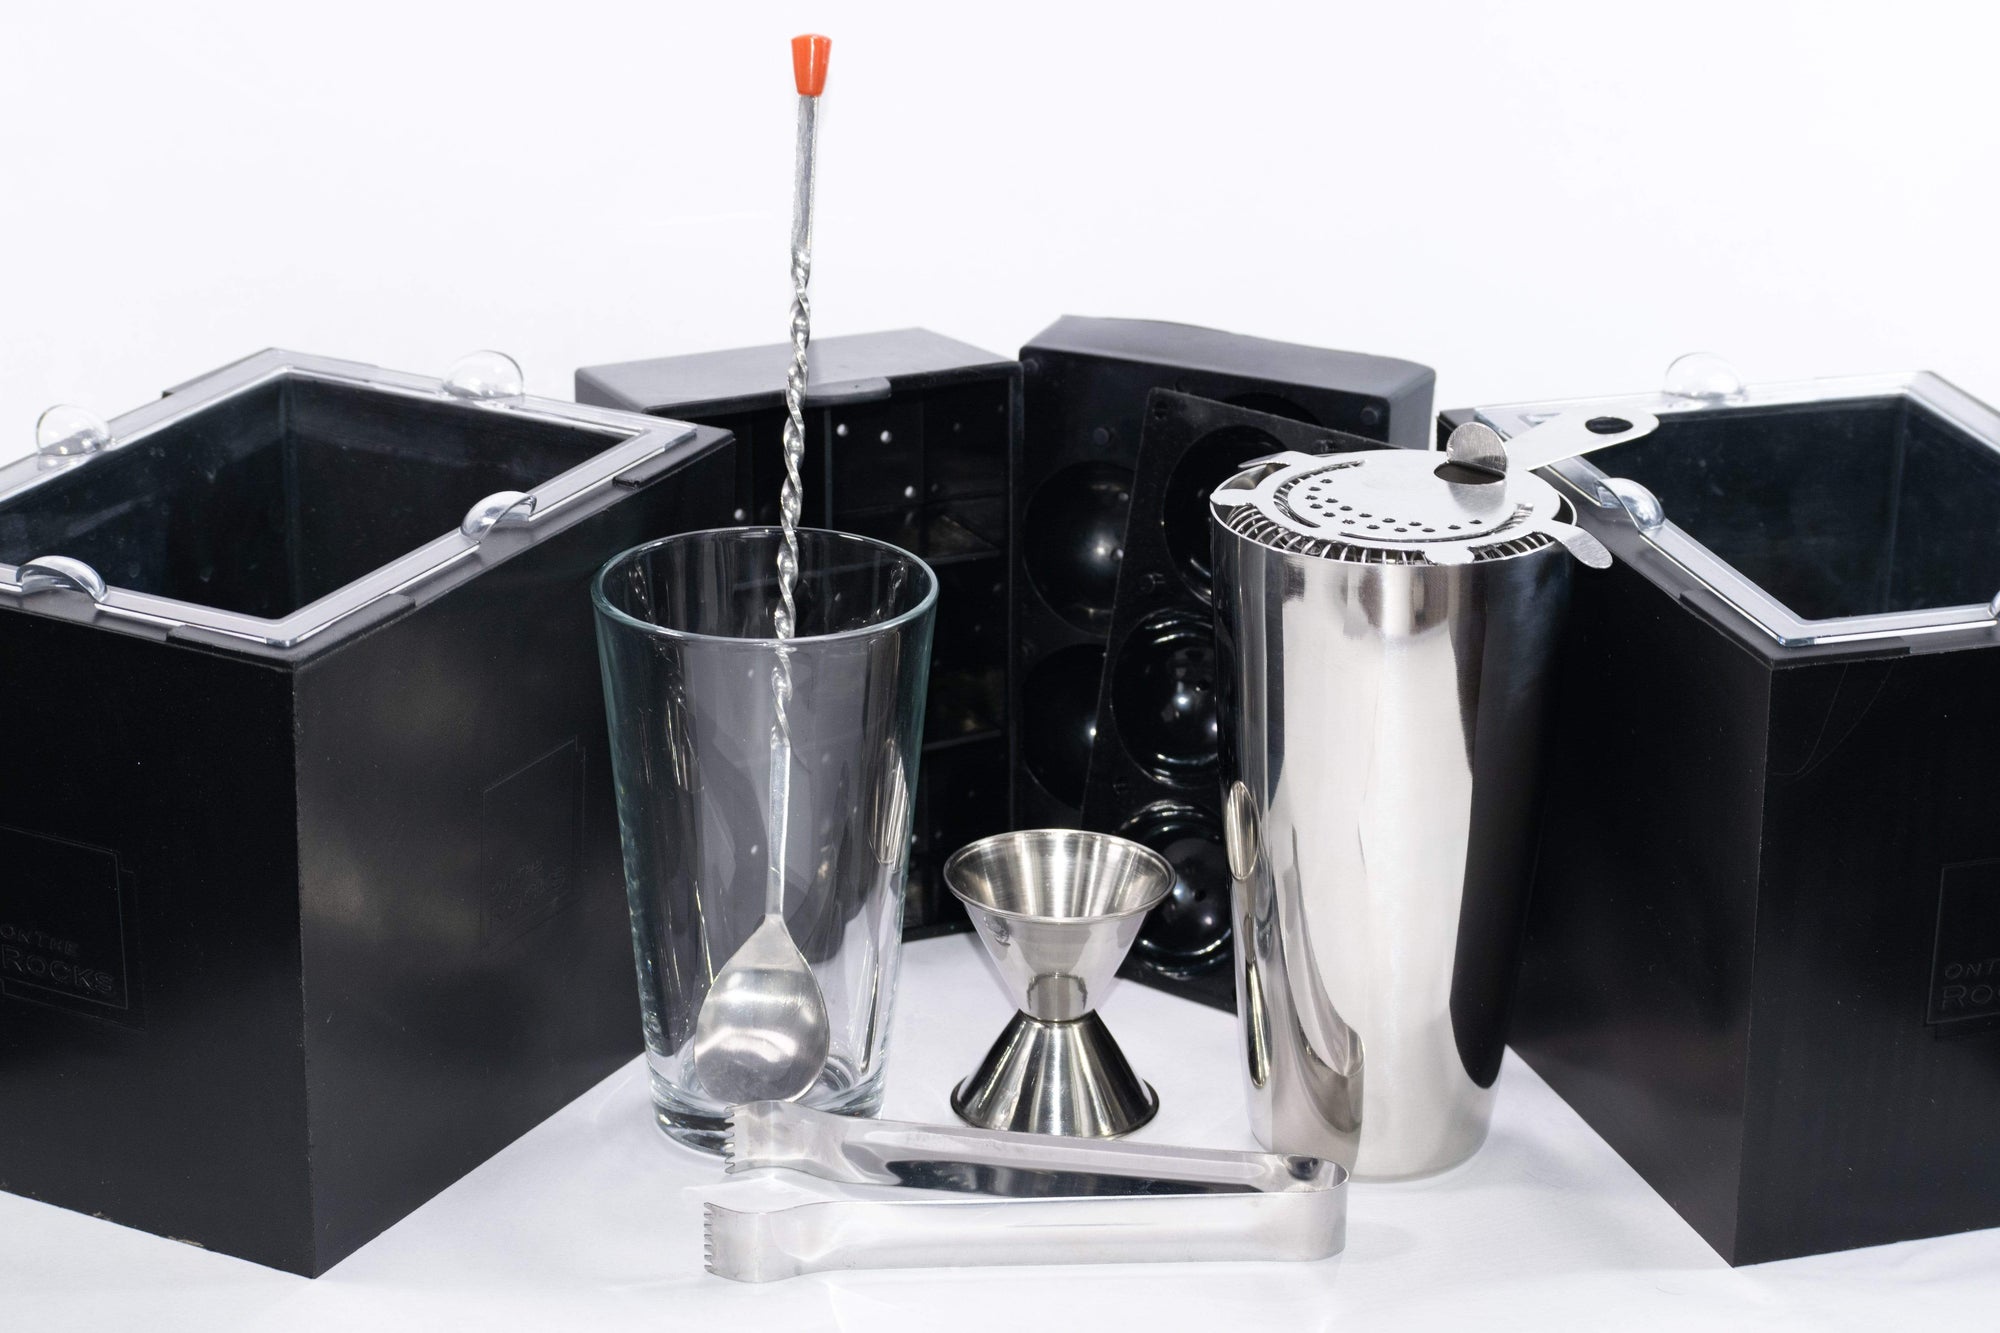 Minimalist cocktail kit featuring strainer, cocktail spoon, jigger, shaker, and ice tongs plus two OnTheRocks IceBoxes that make large clear ice cubes and spheres easily at home